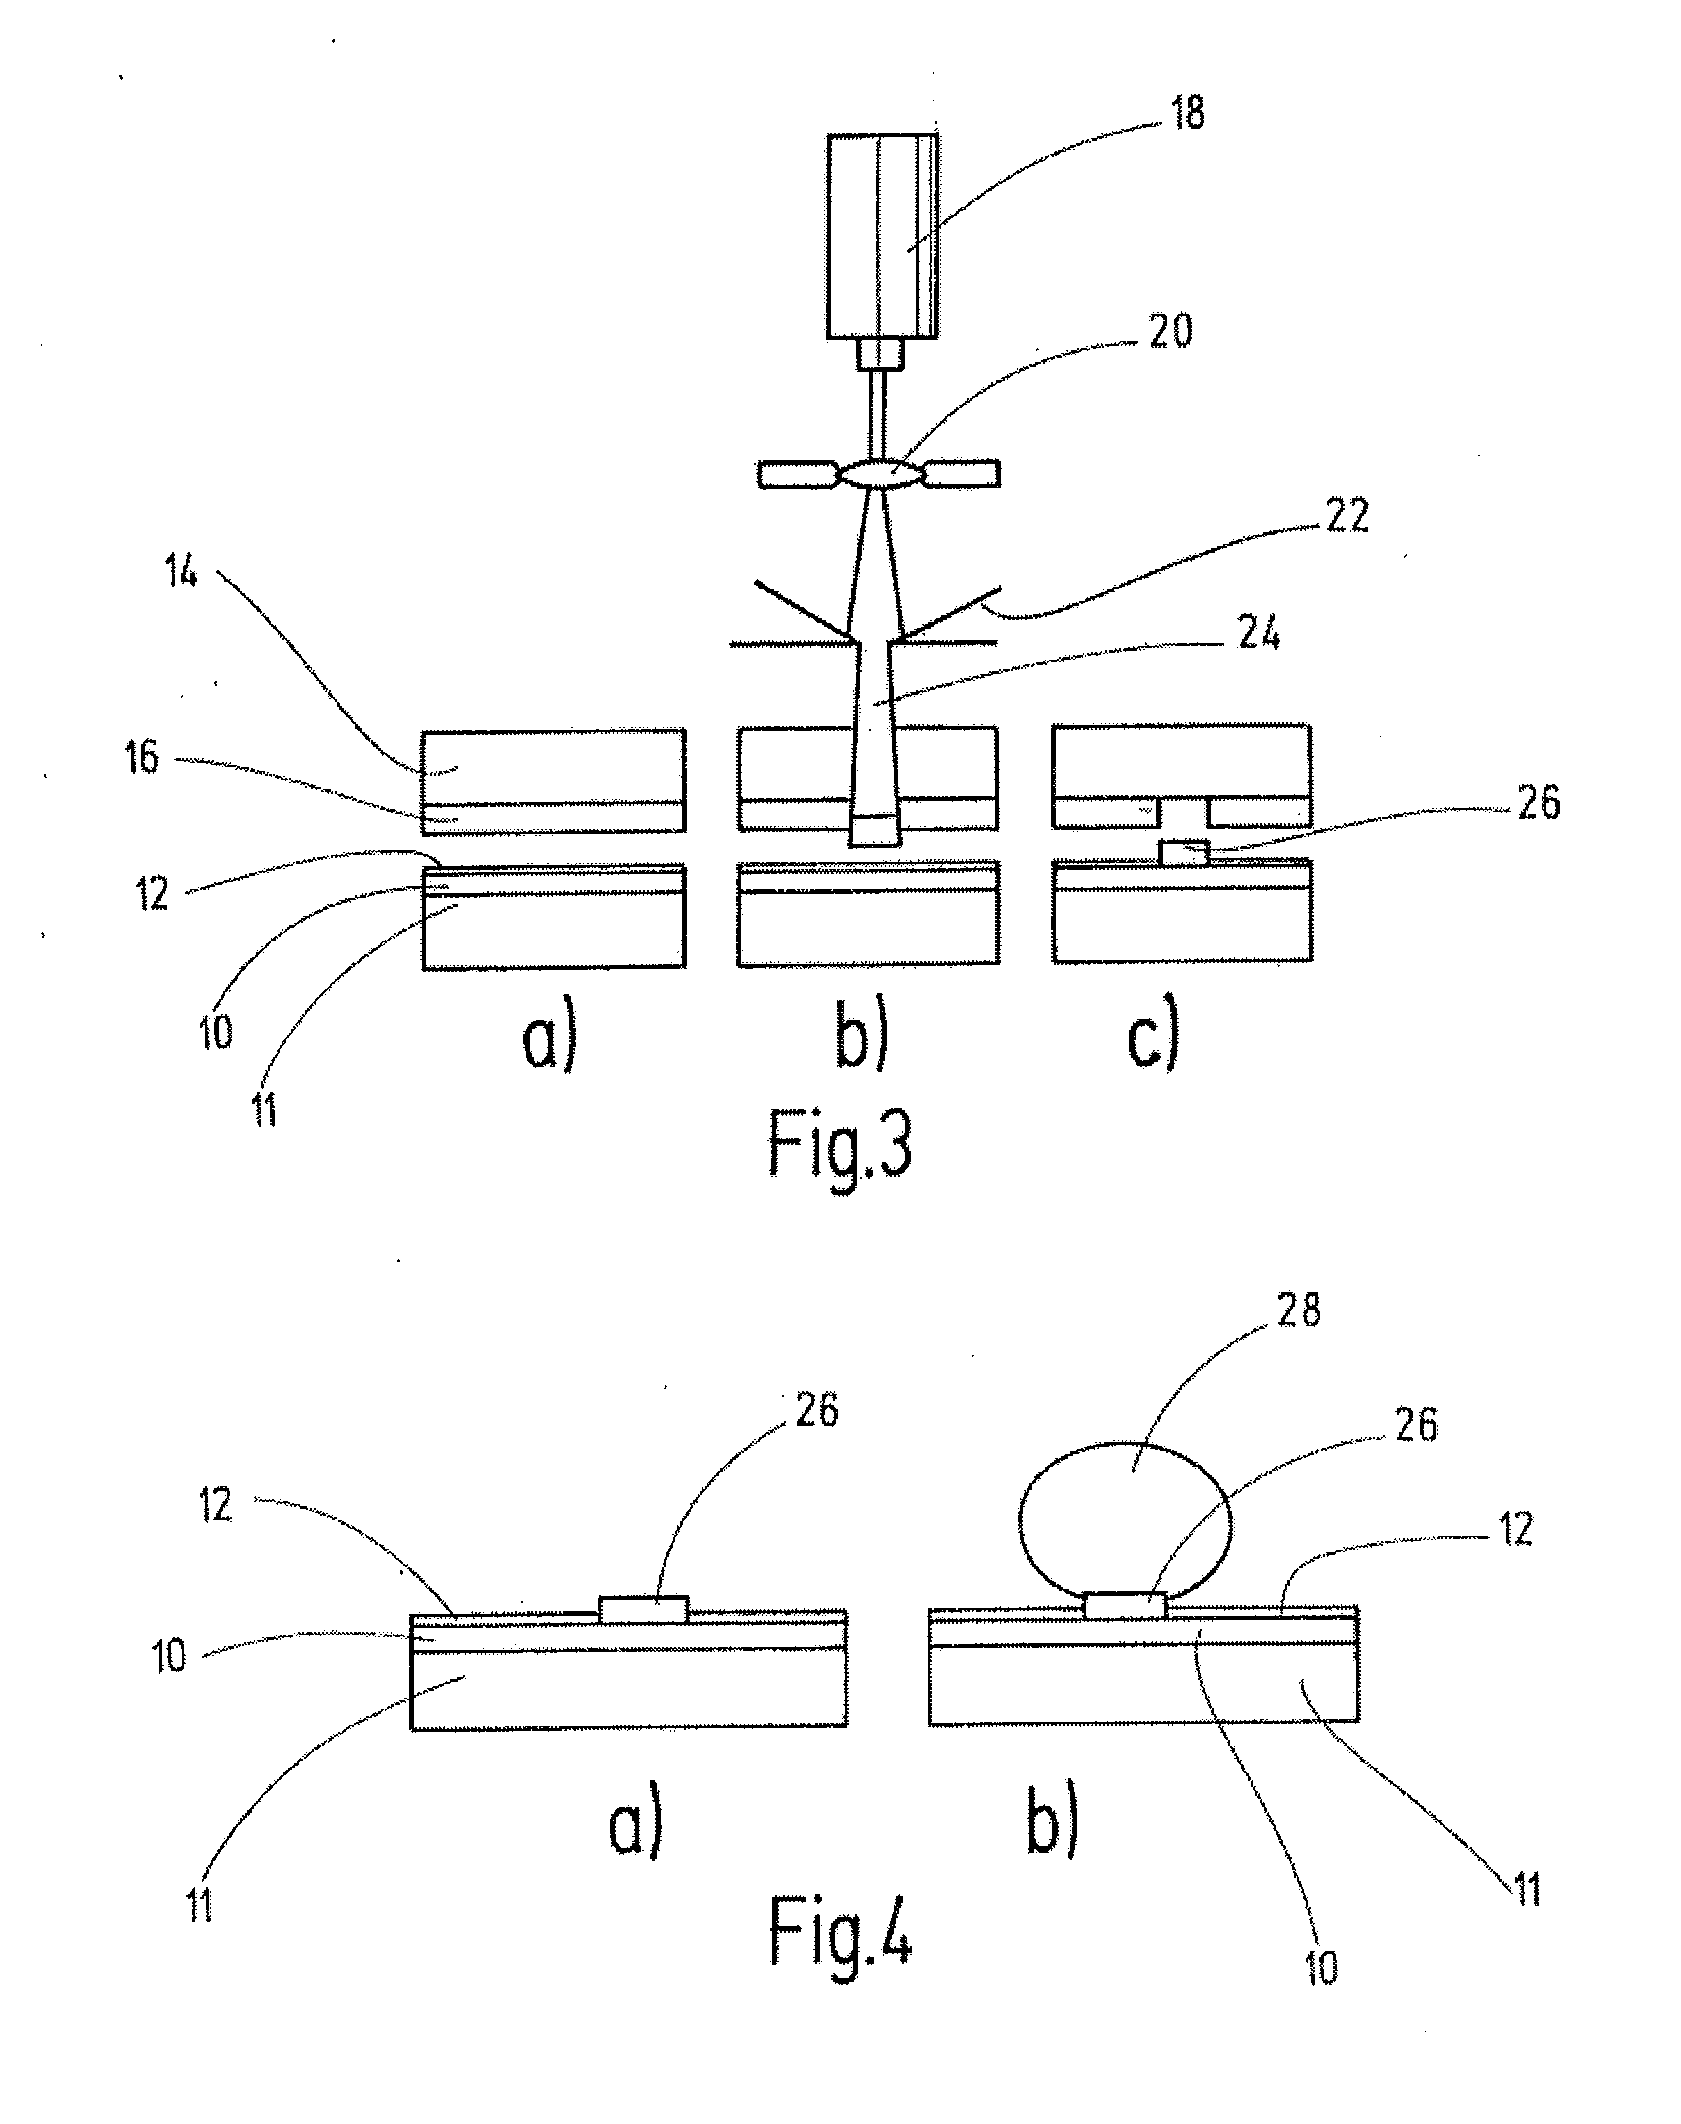 Method of Contacting a Semiconductor Substrate